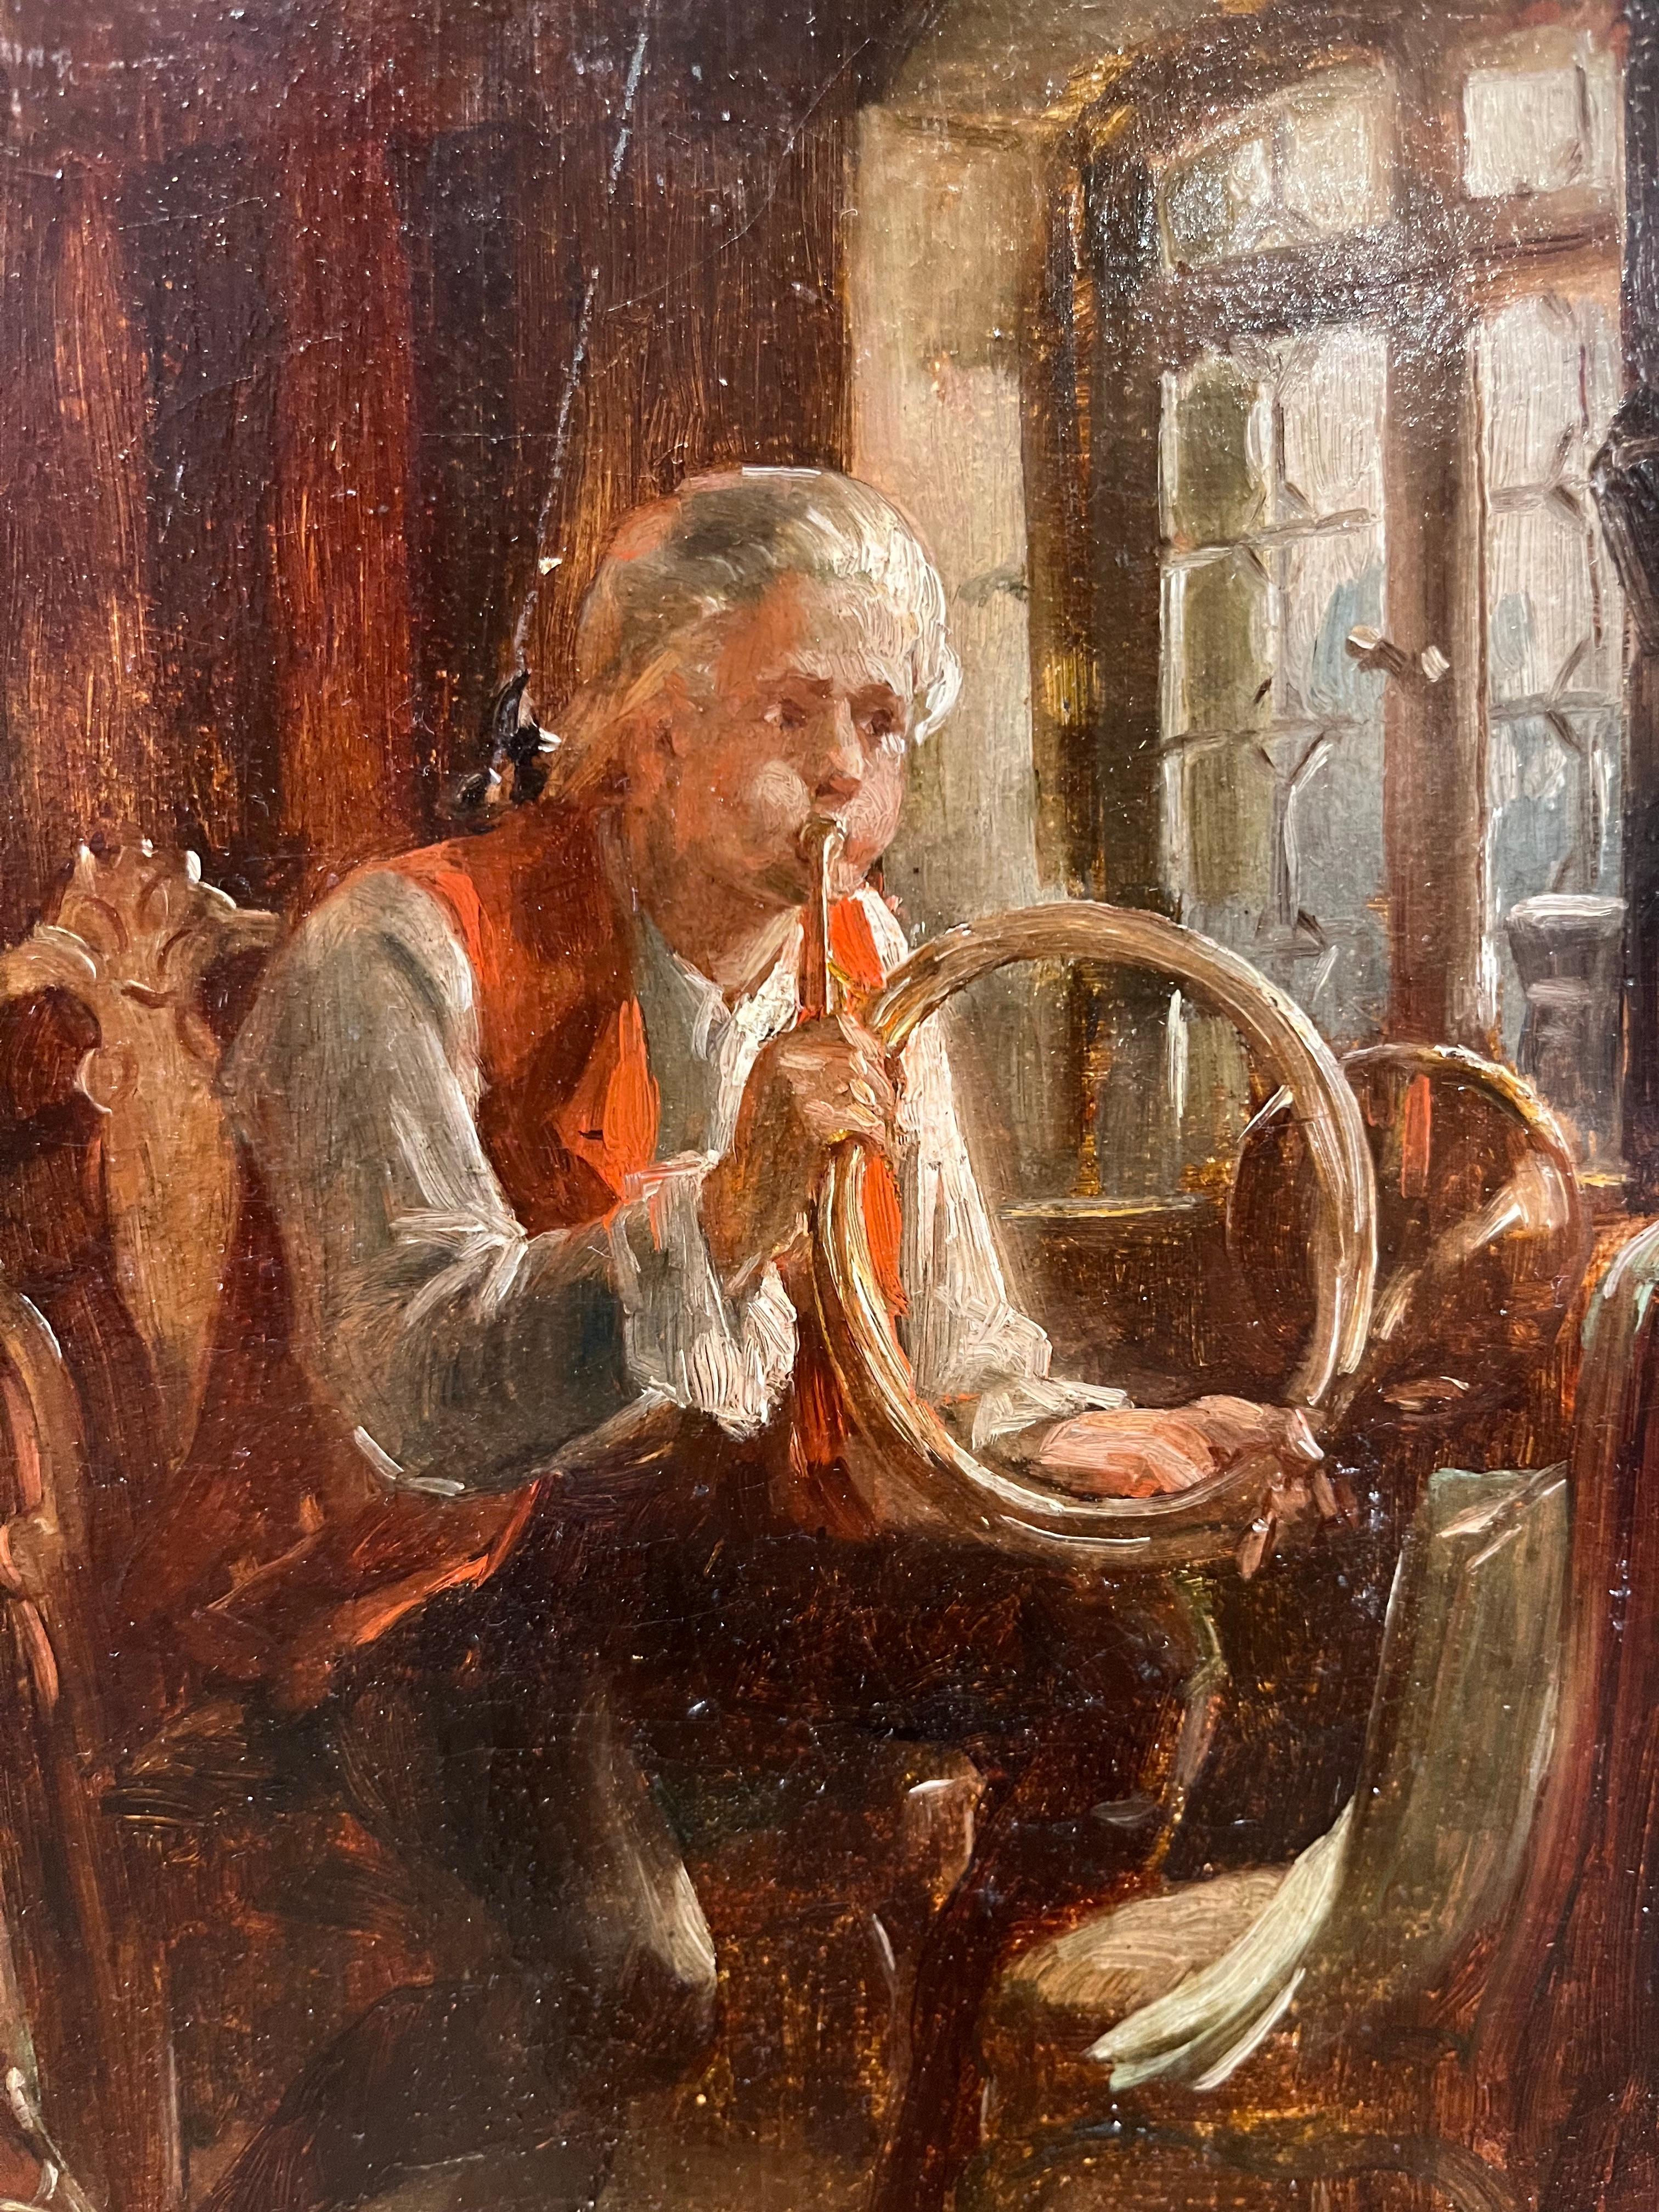 Oil Portrait of Man Playing Music with Horn - American Impressionist Painting by Henry Bacon